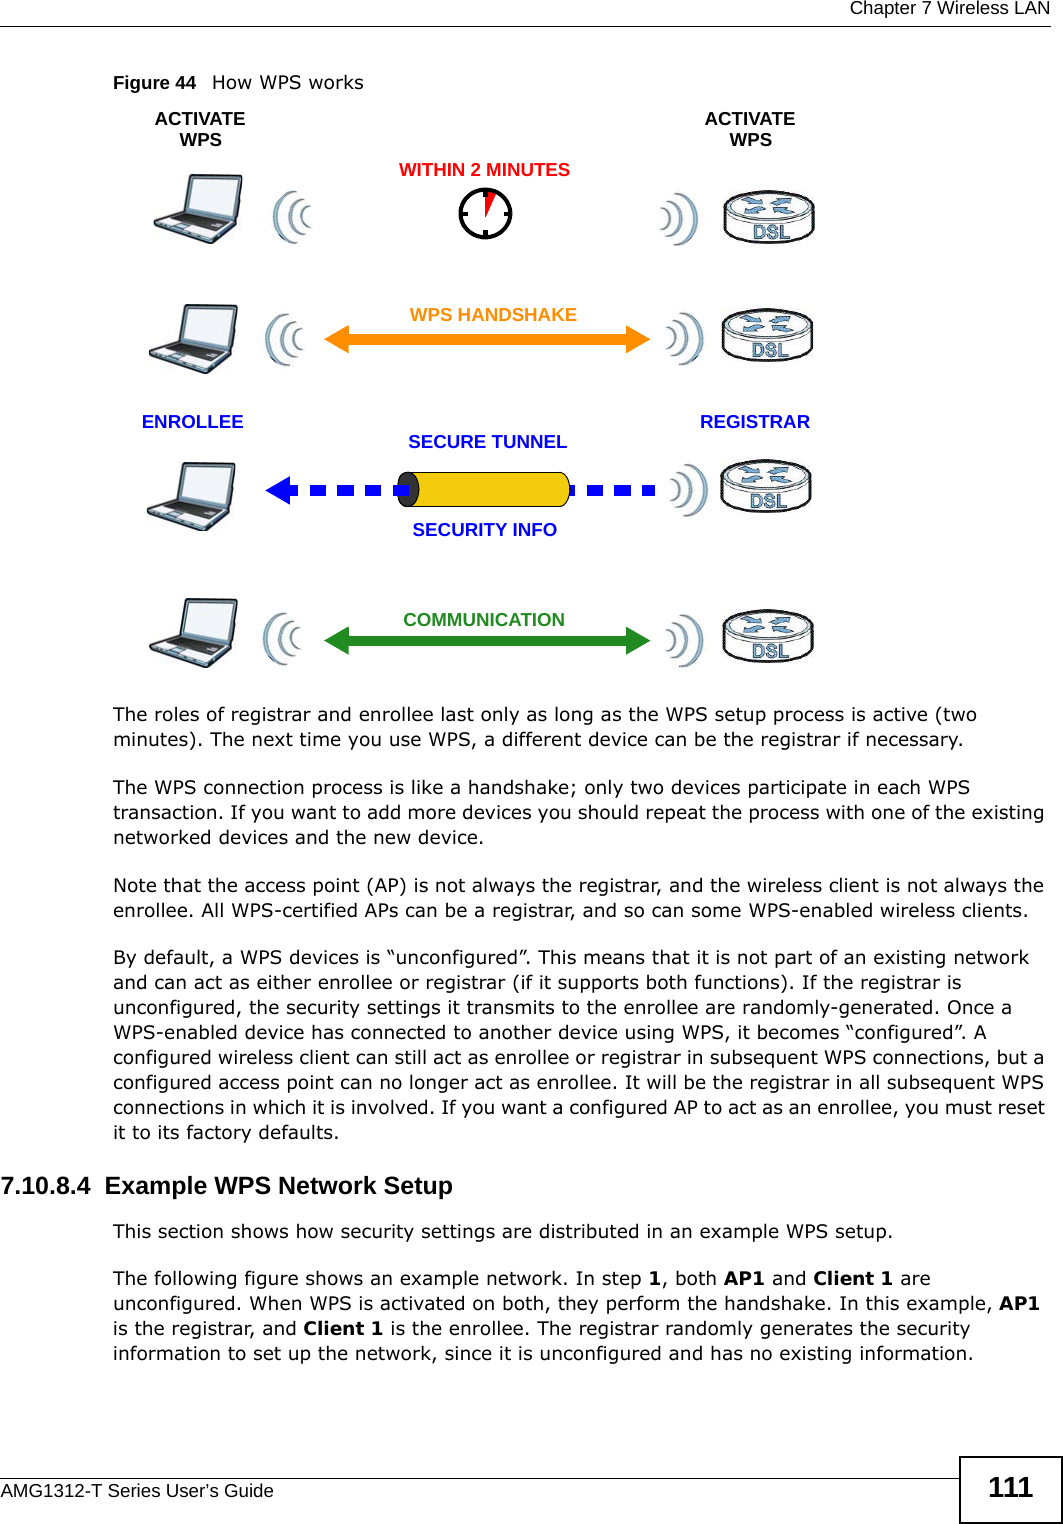  Chapter 7 Wireless LANAMG1312-T Series User’s Guide 111Figure 44   How WPS worksThe roles of registrar and enrollee last only as long as the WPS setup process is active (two minutes). The next time you use WPS, a different device can be the registrar if necessary.The WPS connection process is like a handshake; only two devices participate in each WPS transaction. If you want to add more devices you should repeat the process with one of the existing networked devices and the new device.Note that the access point (AP) is not always the registrar, and the wireless client is not always the enrollee. All WPS-certified APs can be a registrar, and so can some WPS-enabled wireless clients.By default, a WPS devices is “unconfigured”. This means that it is not part of an existing network and can act as either enrollee or registrar (if it supports both functions). If the registrar is unconfigured, the security settings it transmits to the enrollee are randomly-generated. Once a WPS-enabled device has connected to another device using WPS, it becomes “configured”. A configured wireless client can still act as enrollee or registrar in subsequent WPS connections, but a configured access point can no longer act as enrollee. It will be the registrar in all subsequent WPS connections in which it is involved. If you want a configured AP to act as an enrollee, you must reset it to its factory defaults.7.10.8.4  Example WPS Network SetupThis section shows how security settings are distributed in an example WPS setup.The following figure shows an example network. In step 1, both AP1 and Client 1 are unconfigured. When WPS is activated on both, they perform the handshake. In this example, AP1 is the registrar, and Client 1 is the enrollee. The registrar randomly generates the security information to set up the network, since it is unconfigured and has no existing information.SECURE TUNNELSECURITY INFOWITHIN 2 MINUTESCOMMUNICATIONACTIVATEWPSACTIVATEWPSWPS HANDSHAKEREGISTRARENROLLEE